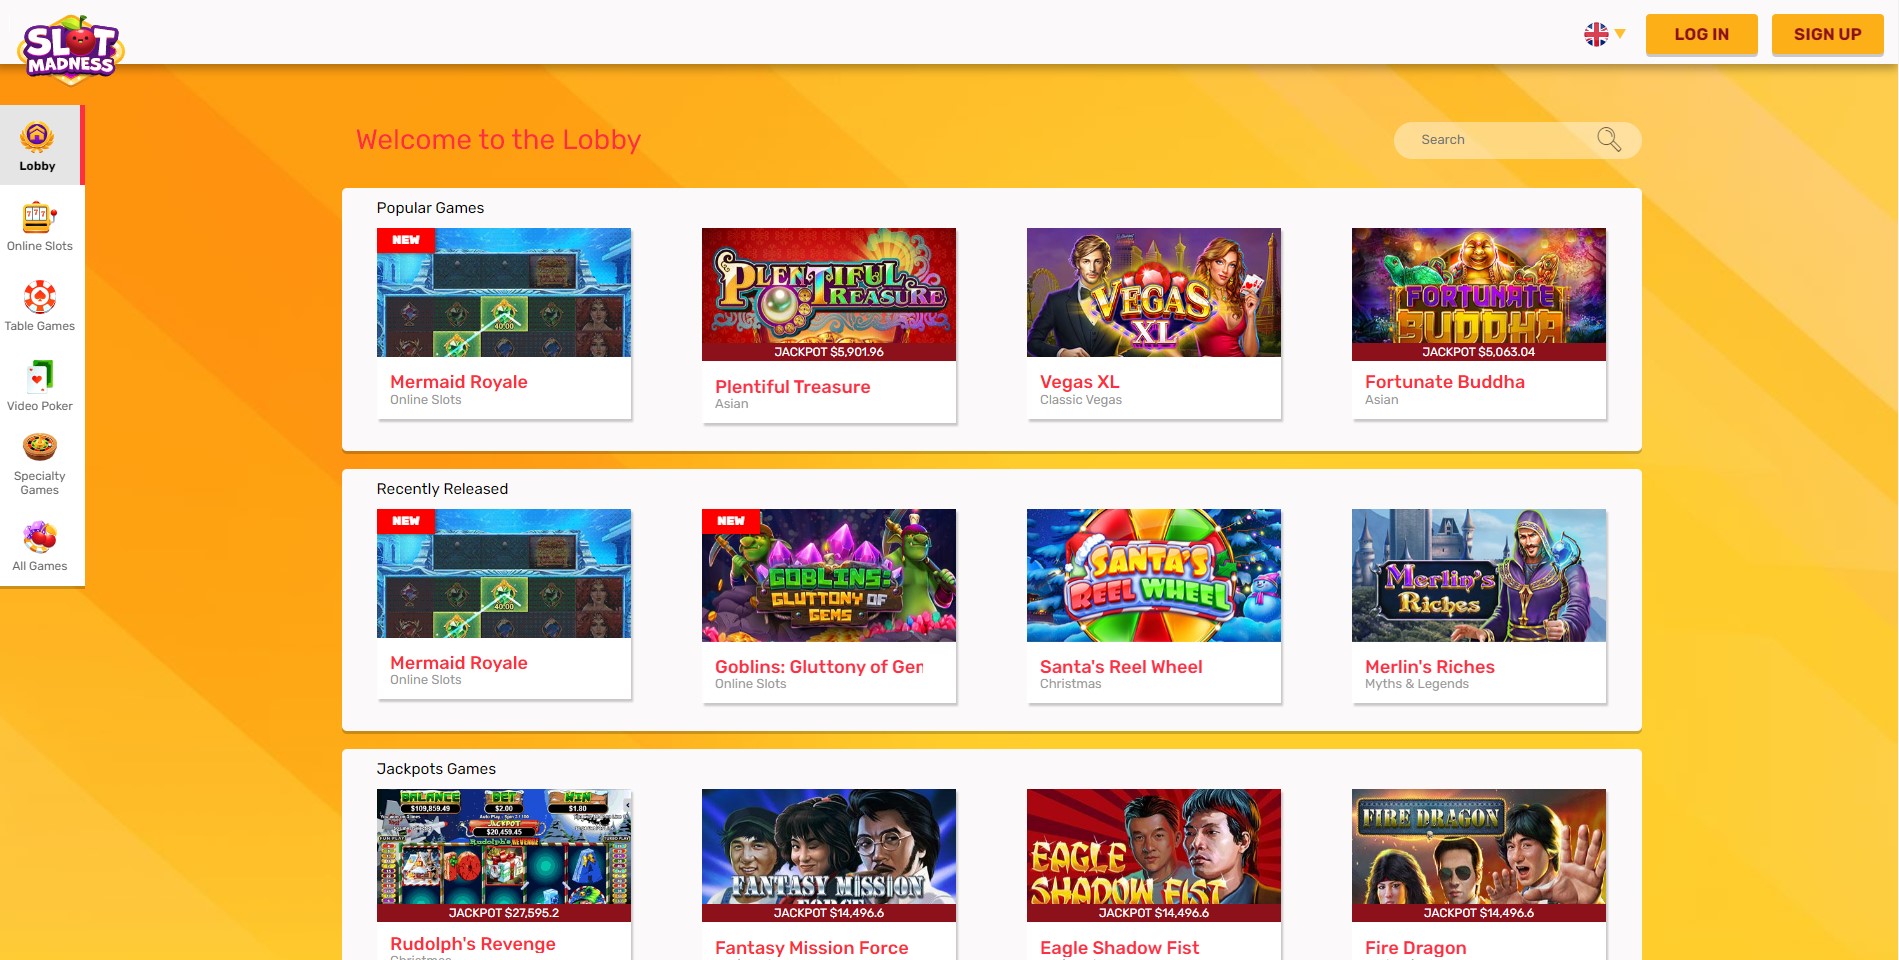 Game categories at Slot Madness